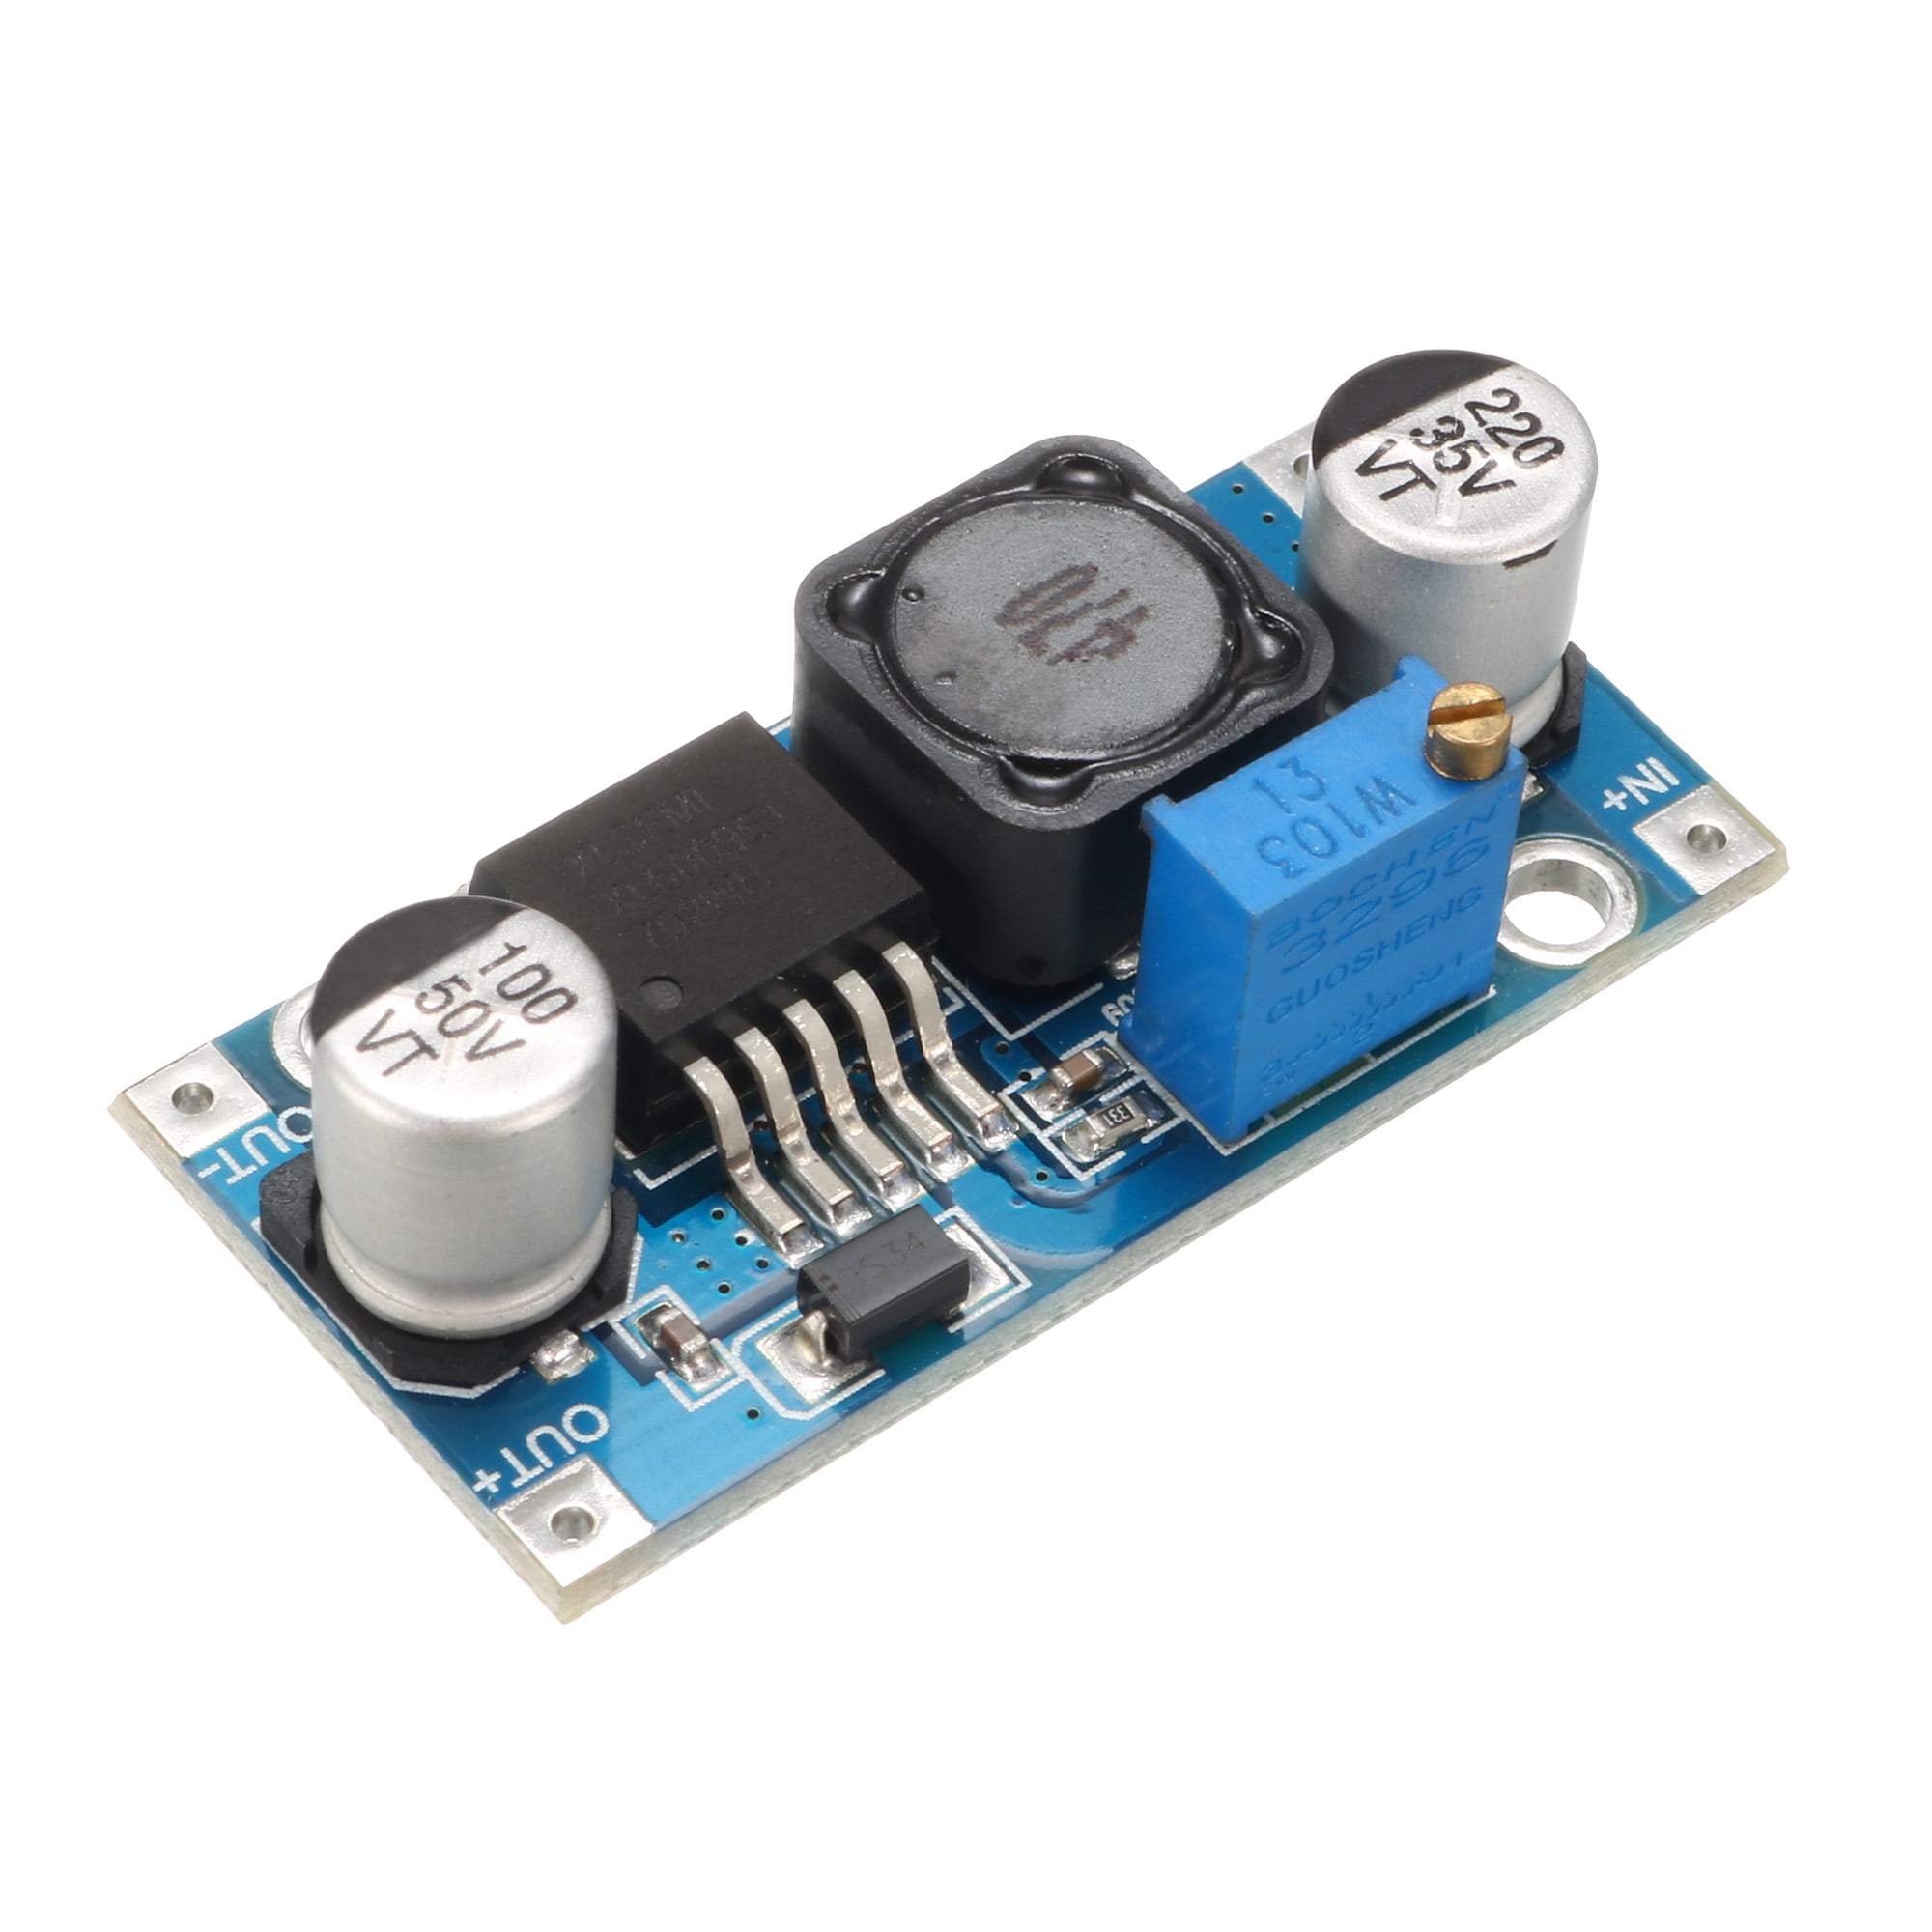 DC-DC Adjustable XL6009 Step-up boost Power Converter Module Replace LM2577 